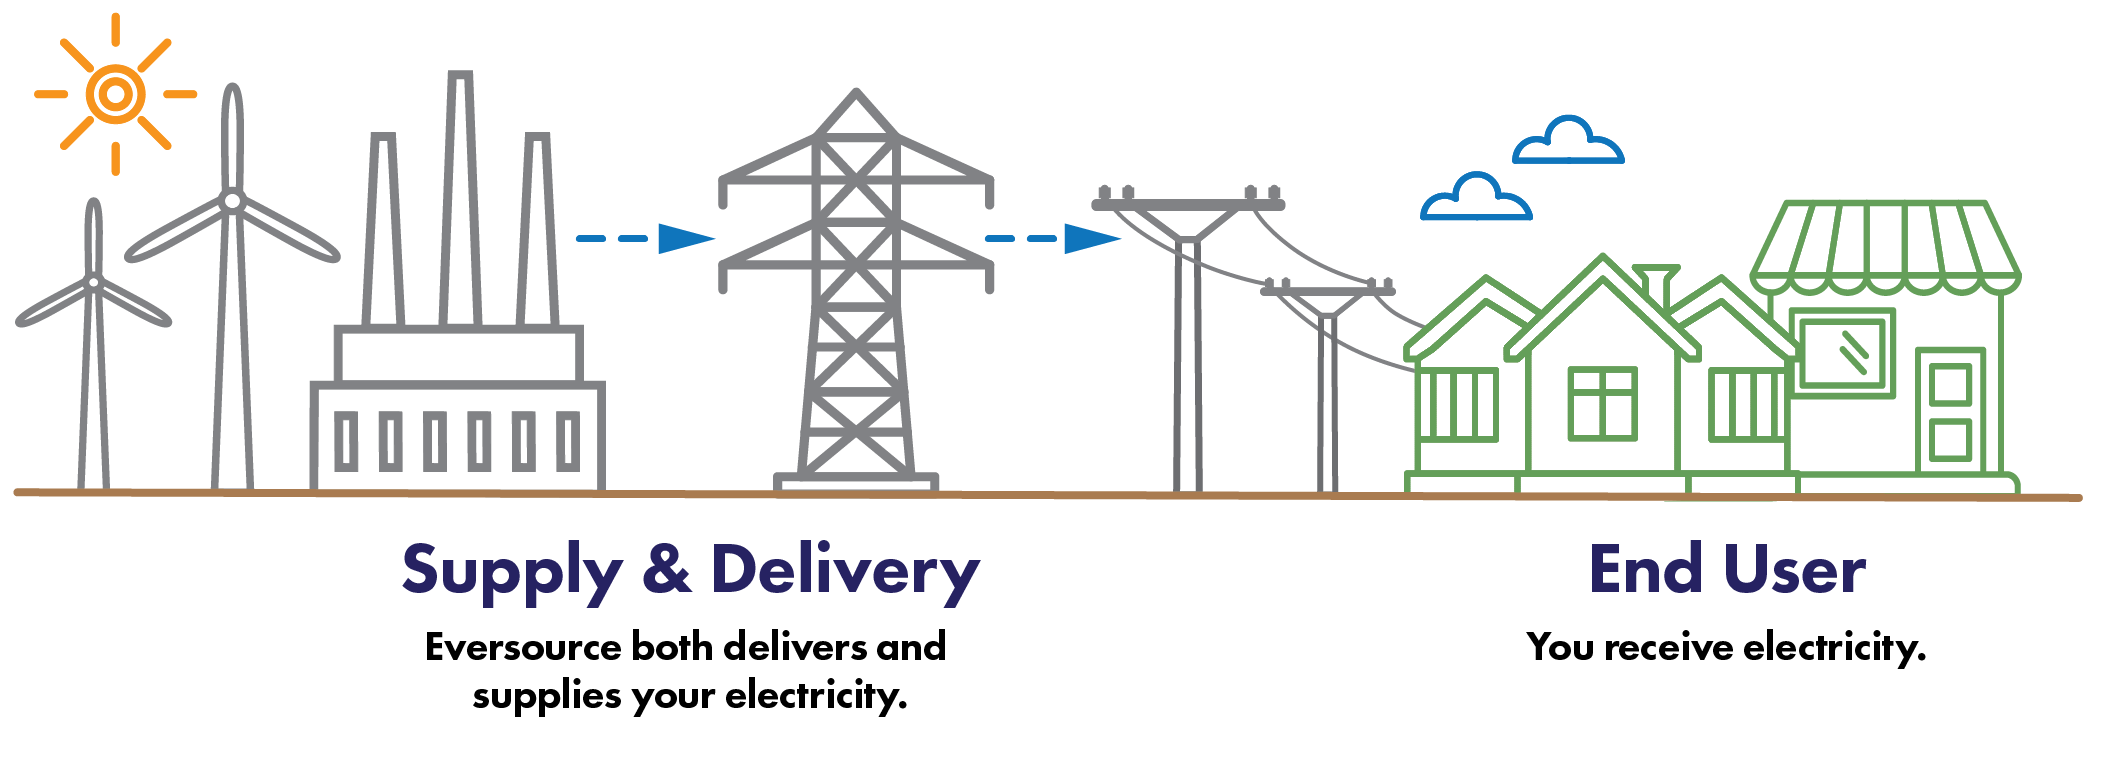 Diagram describing how delivery and supply works without Walpole Power Choice. Detailed description above after the header Without Walpole Power Choice.